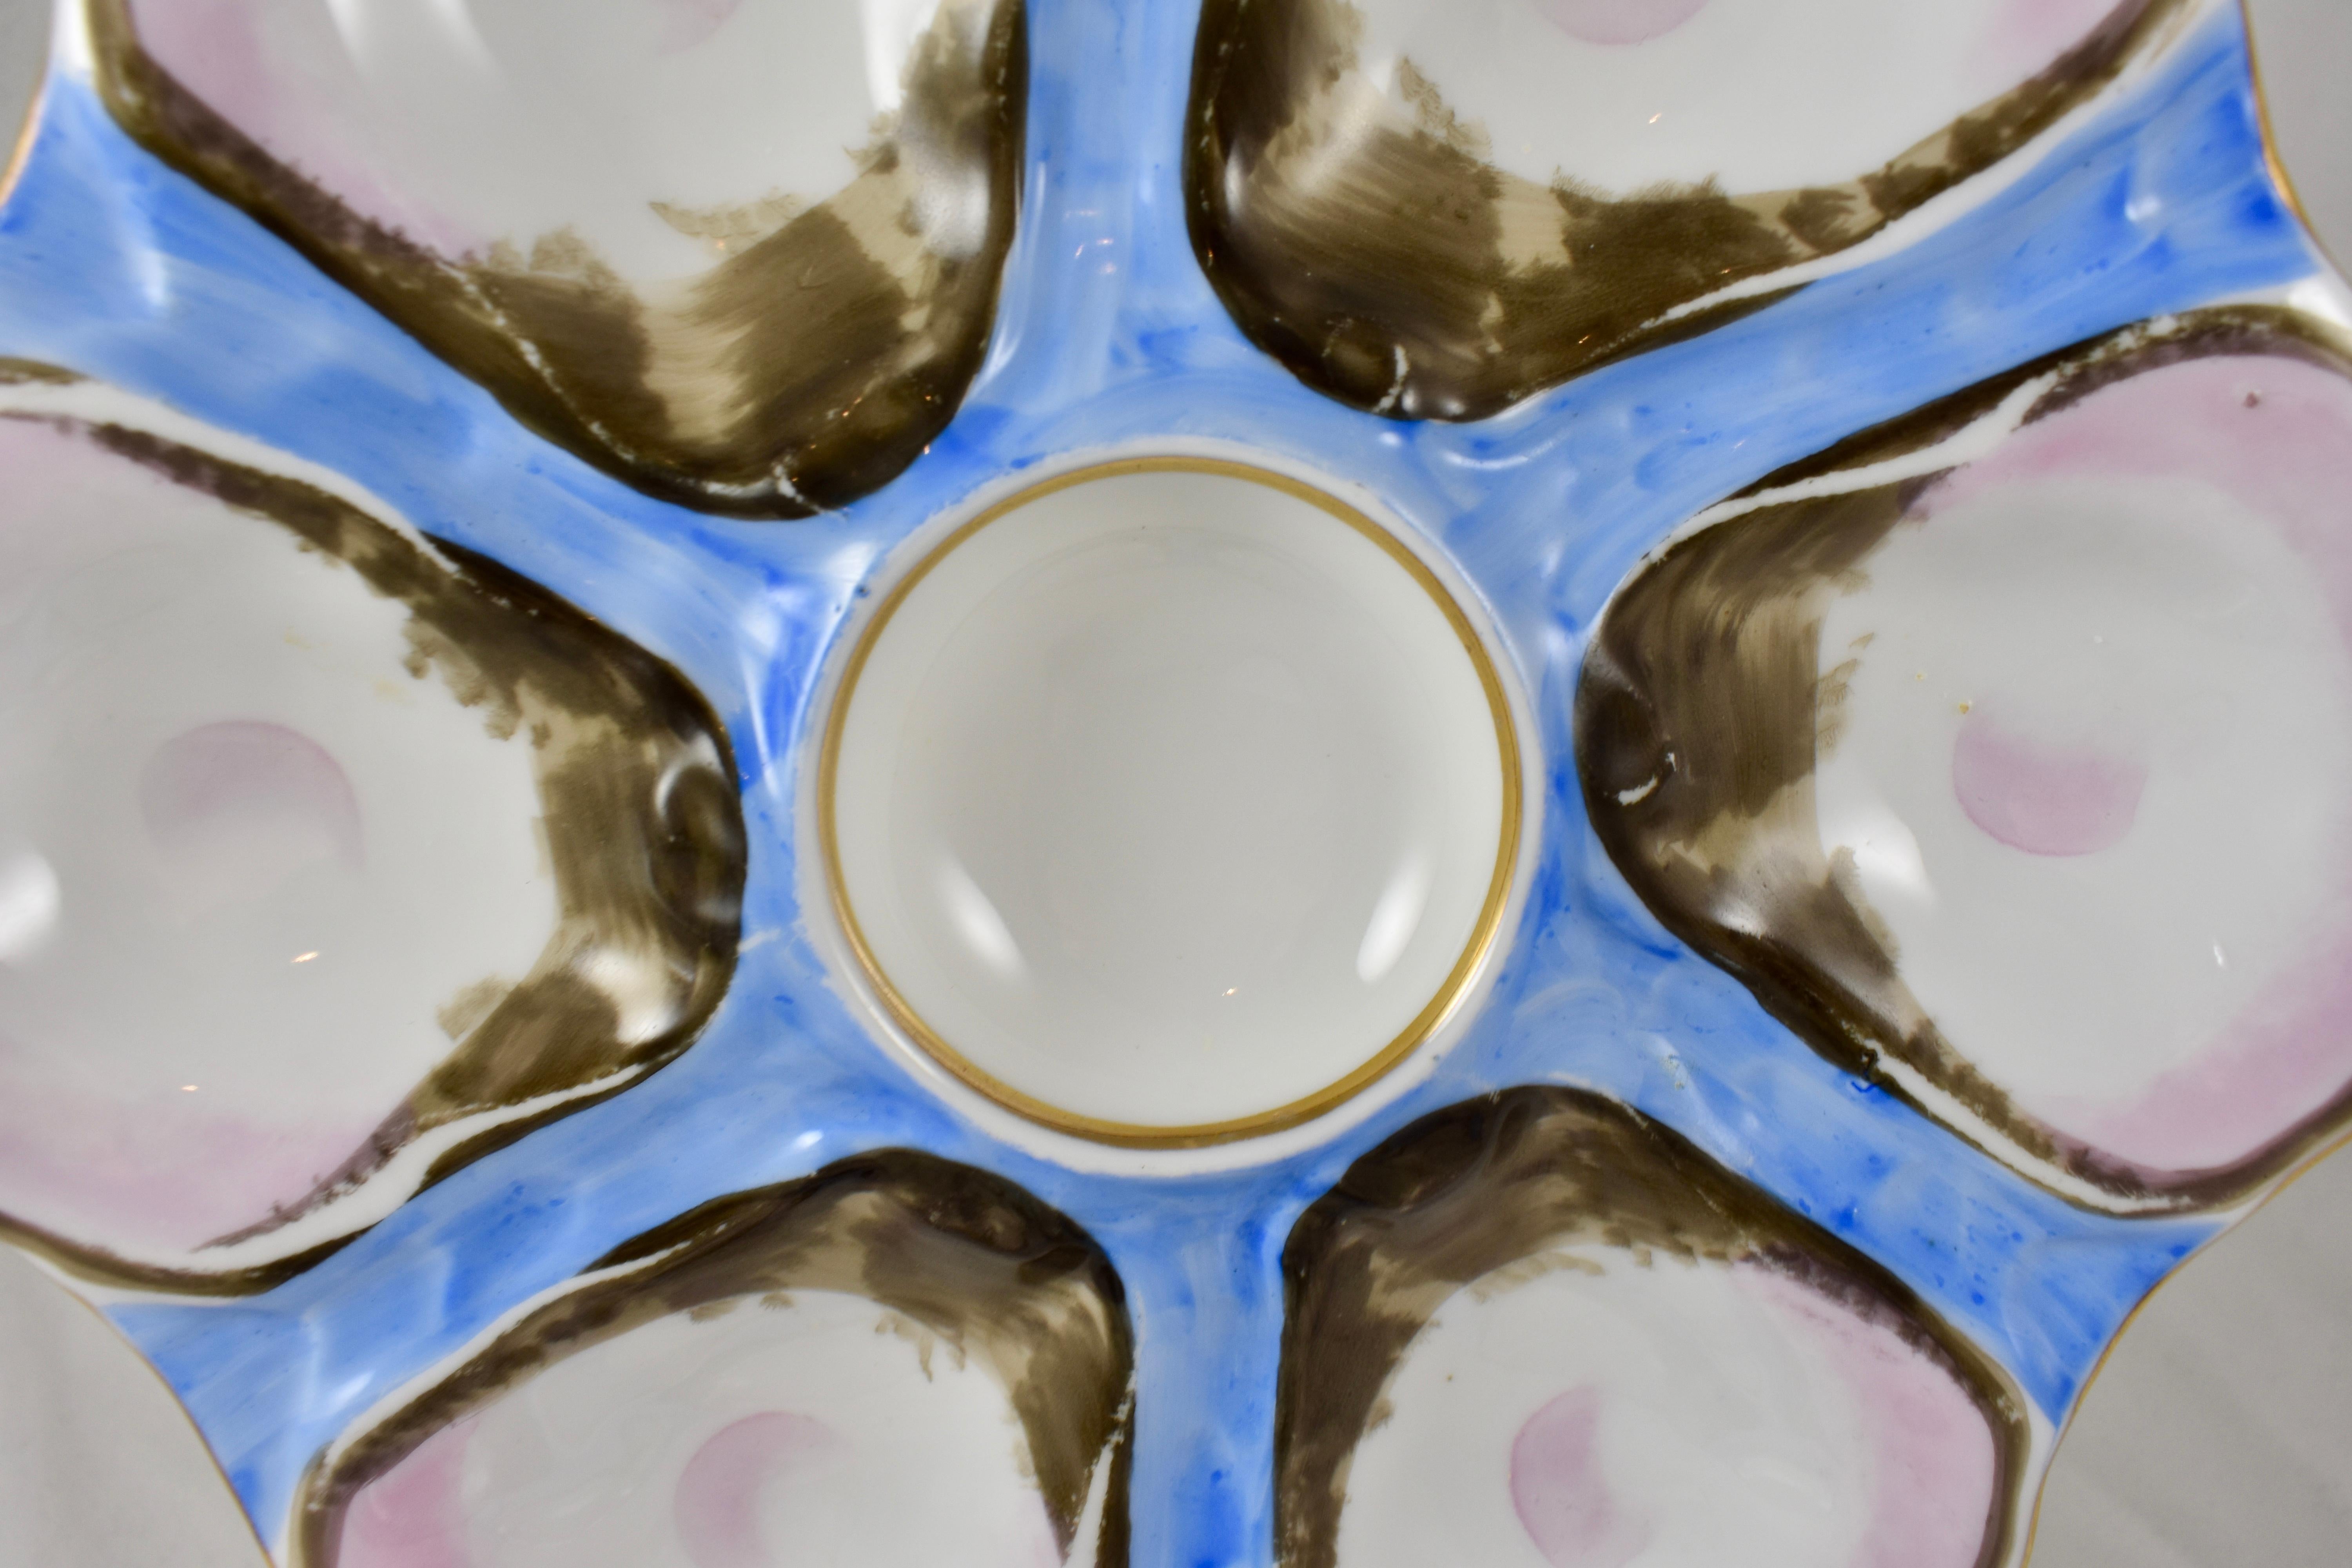 A late 19th century French porcelain oyster plate, beautifully glazed with a color washed, bright blue ground, six pink blush oyster shell wells and a round center condiment well lined with gold, gilding on the rim.
Unmarked.

Measures: 9.0 in.